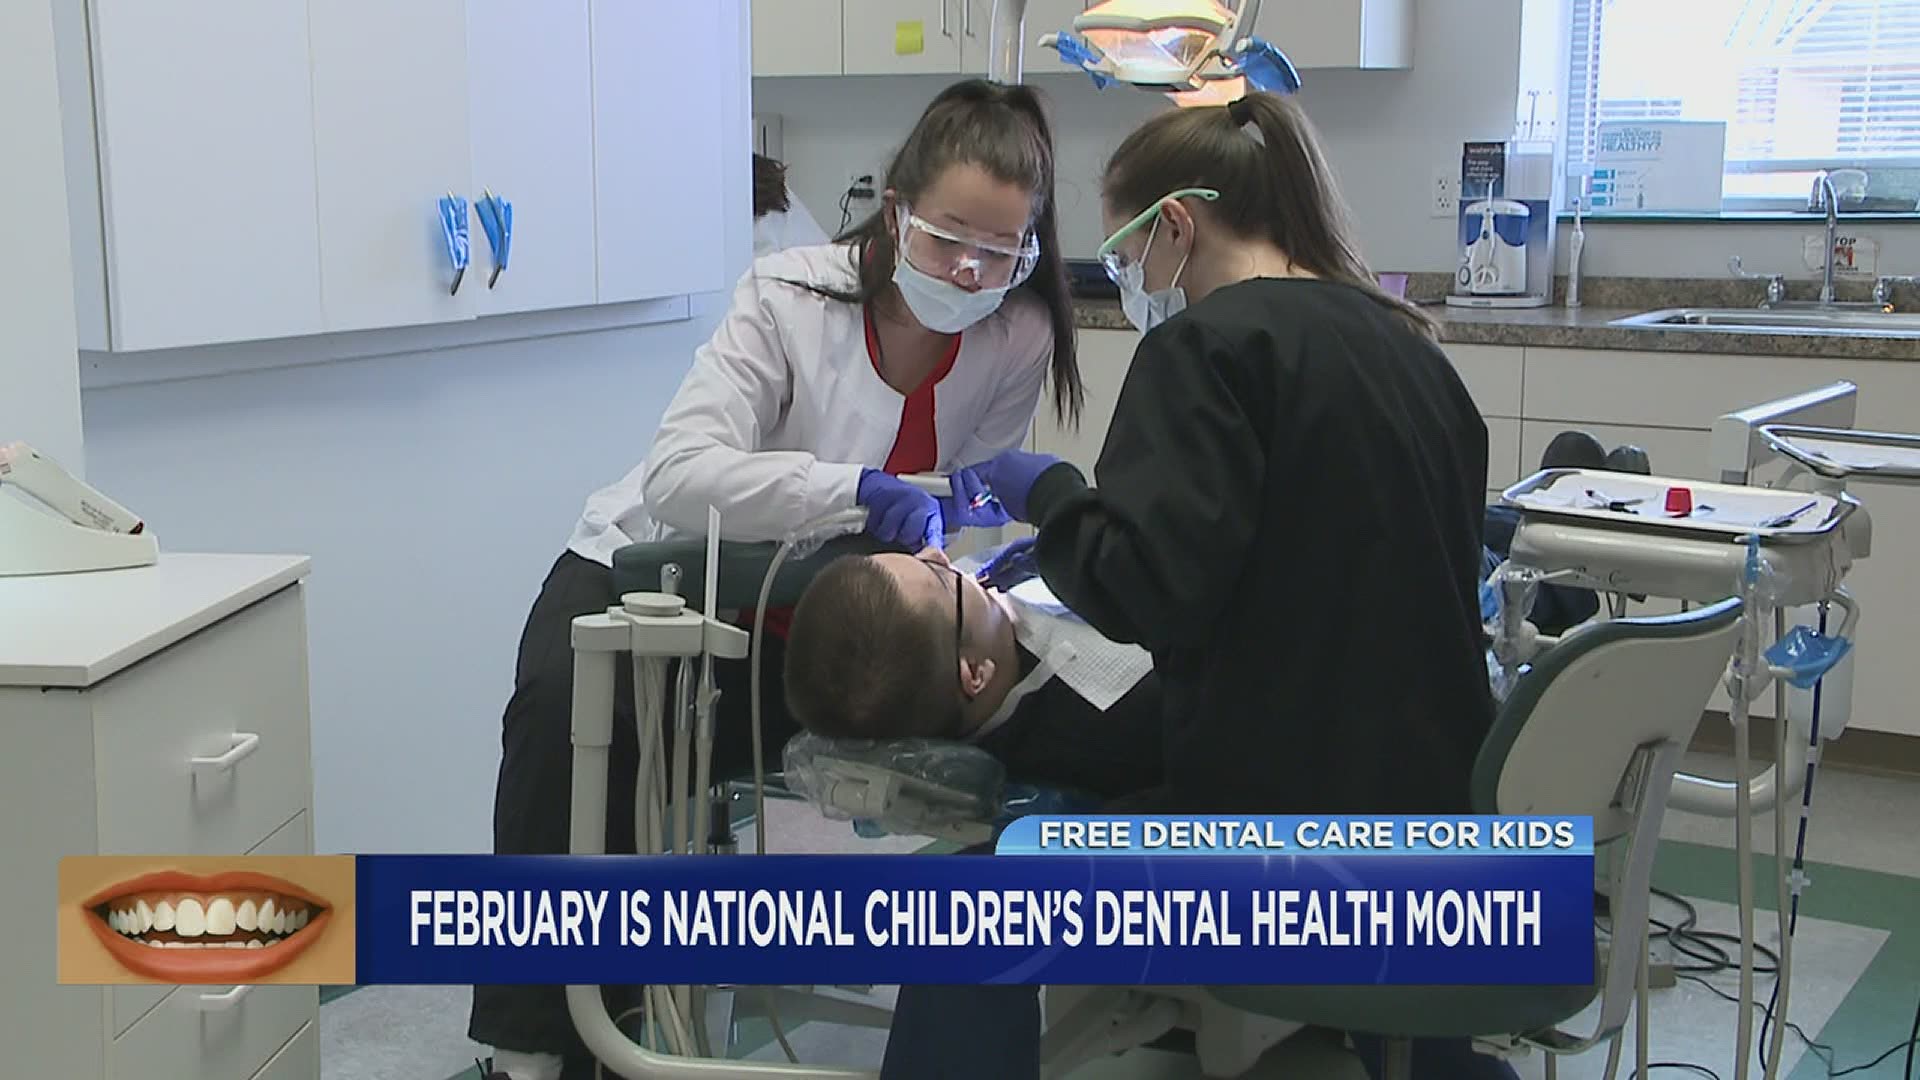 An annual event coming up is offering free teeth cleanings, x-rays, and more for children.